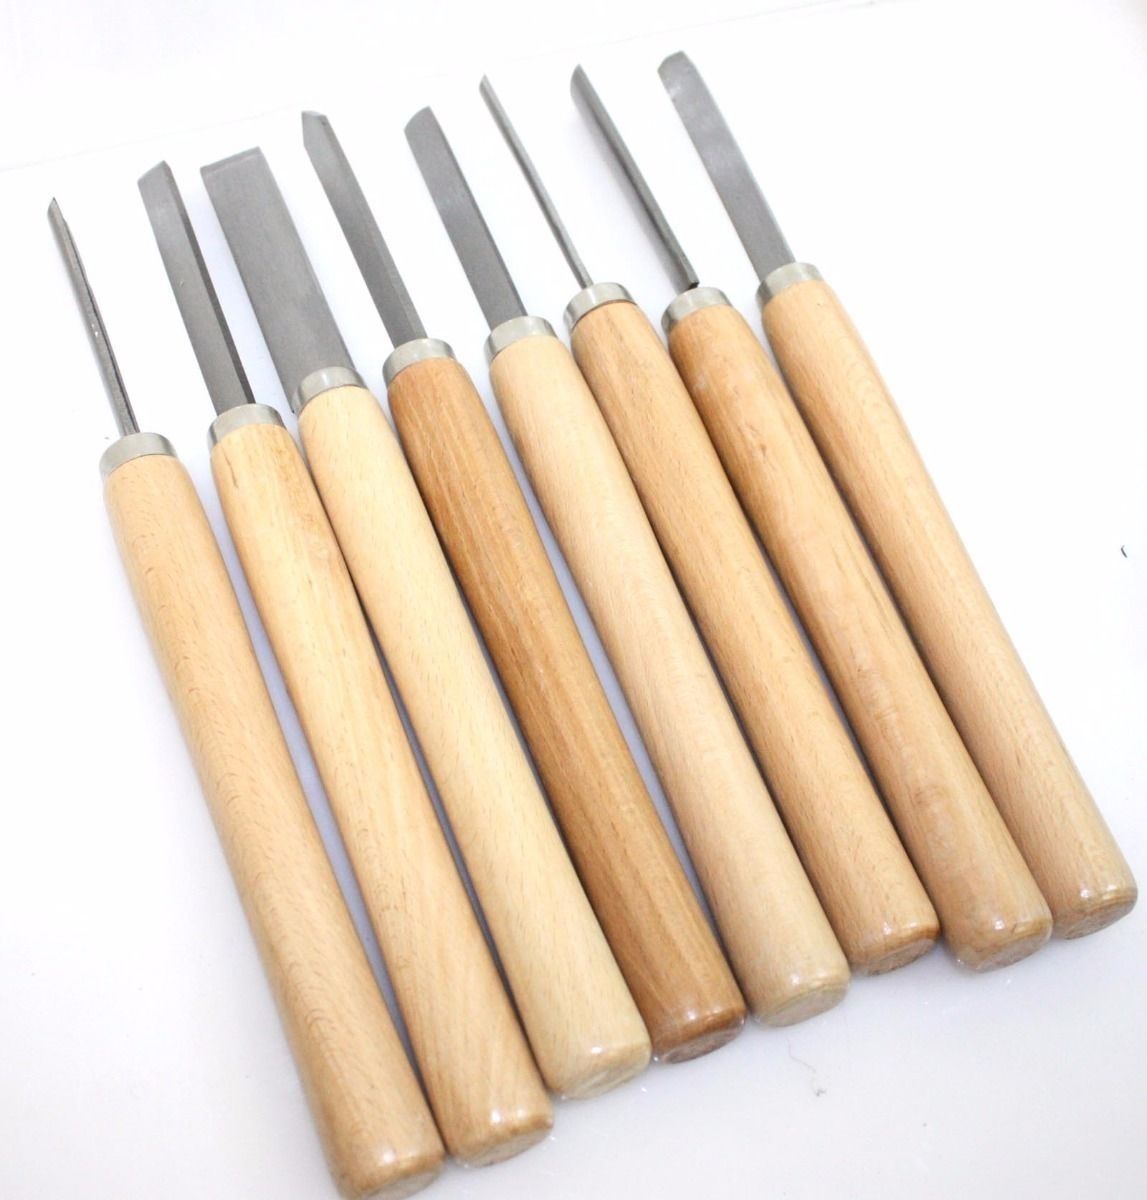 8pc Wood Lathe Chisel Set Turning Tools Woodworking Gouge Skew Parting Spear USA 